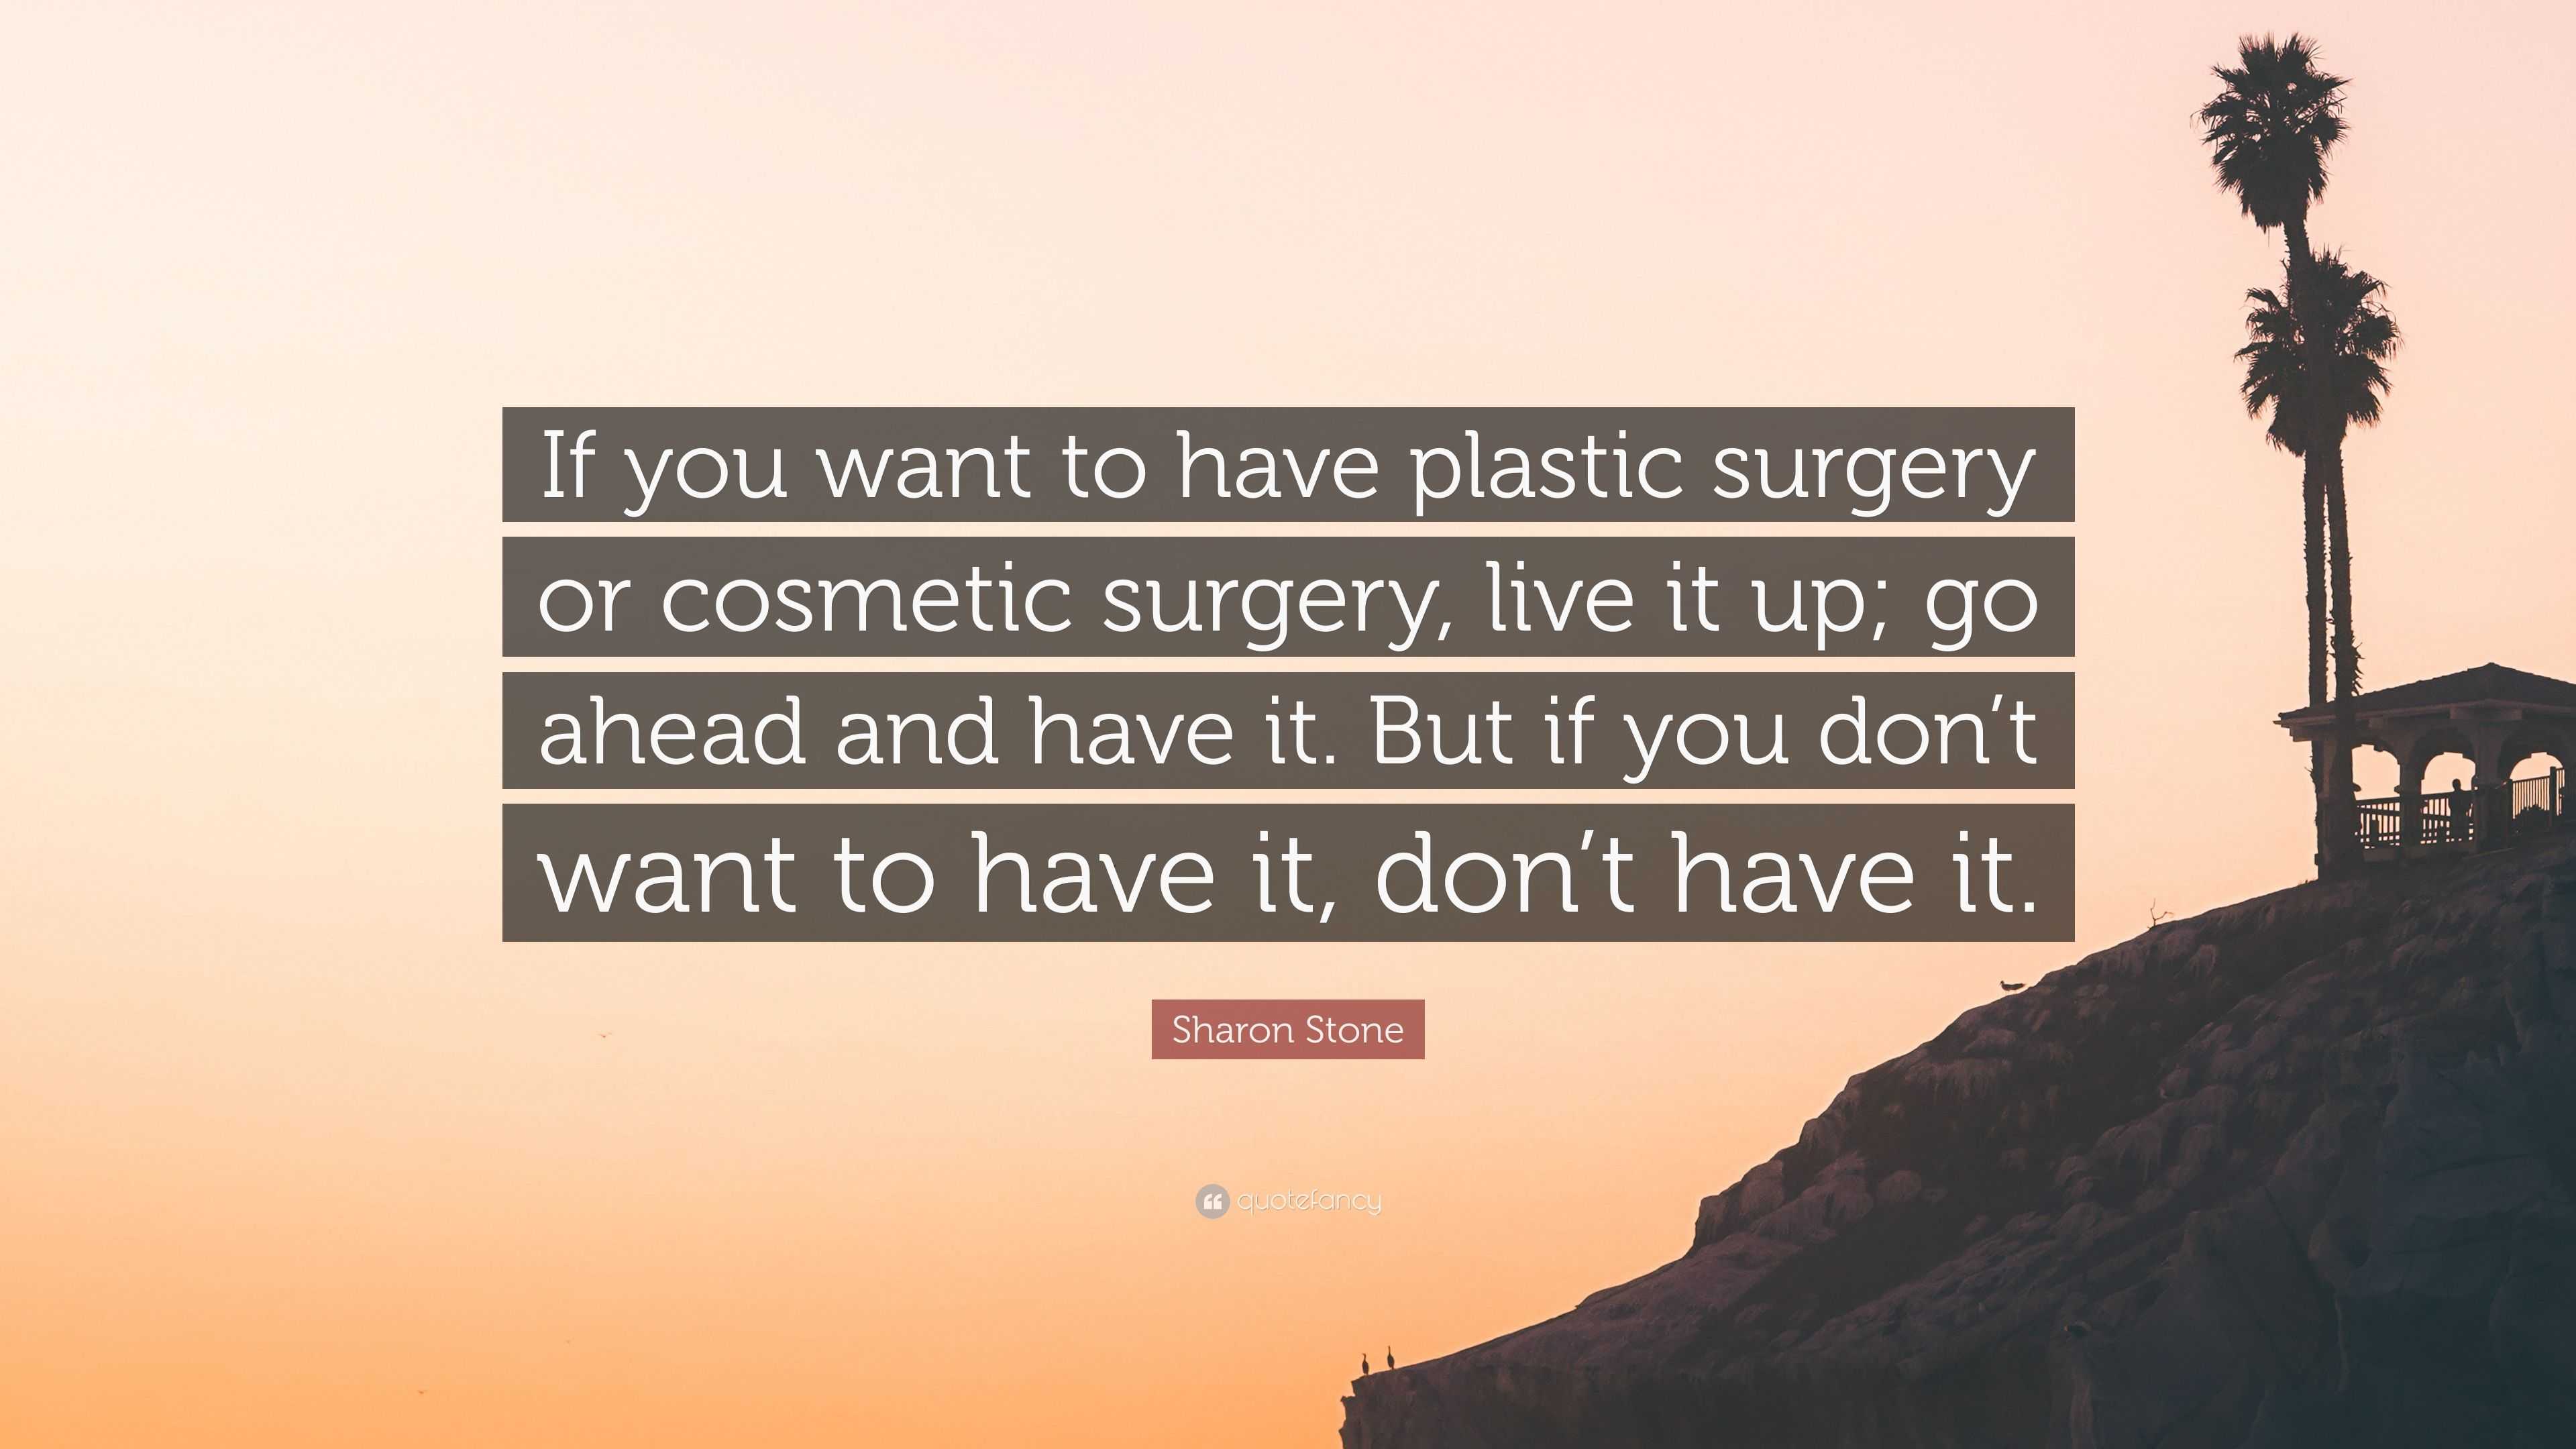 Sharon Stone Quote If You Want To Have Plastic Surgery Or Cosmetic Surgery Live It Up Go Ahead And Have It But If You Don T Want To Have